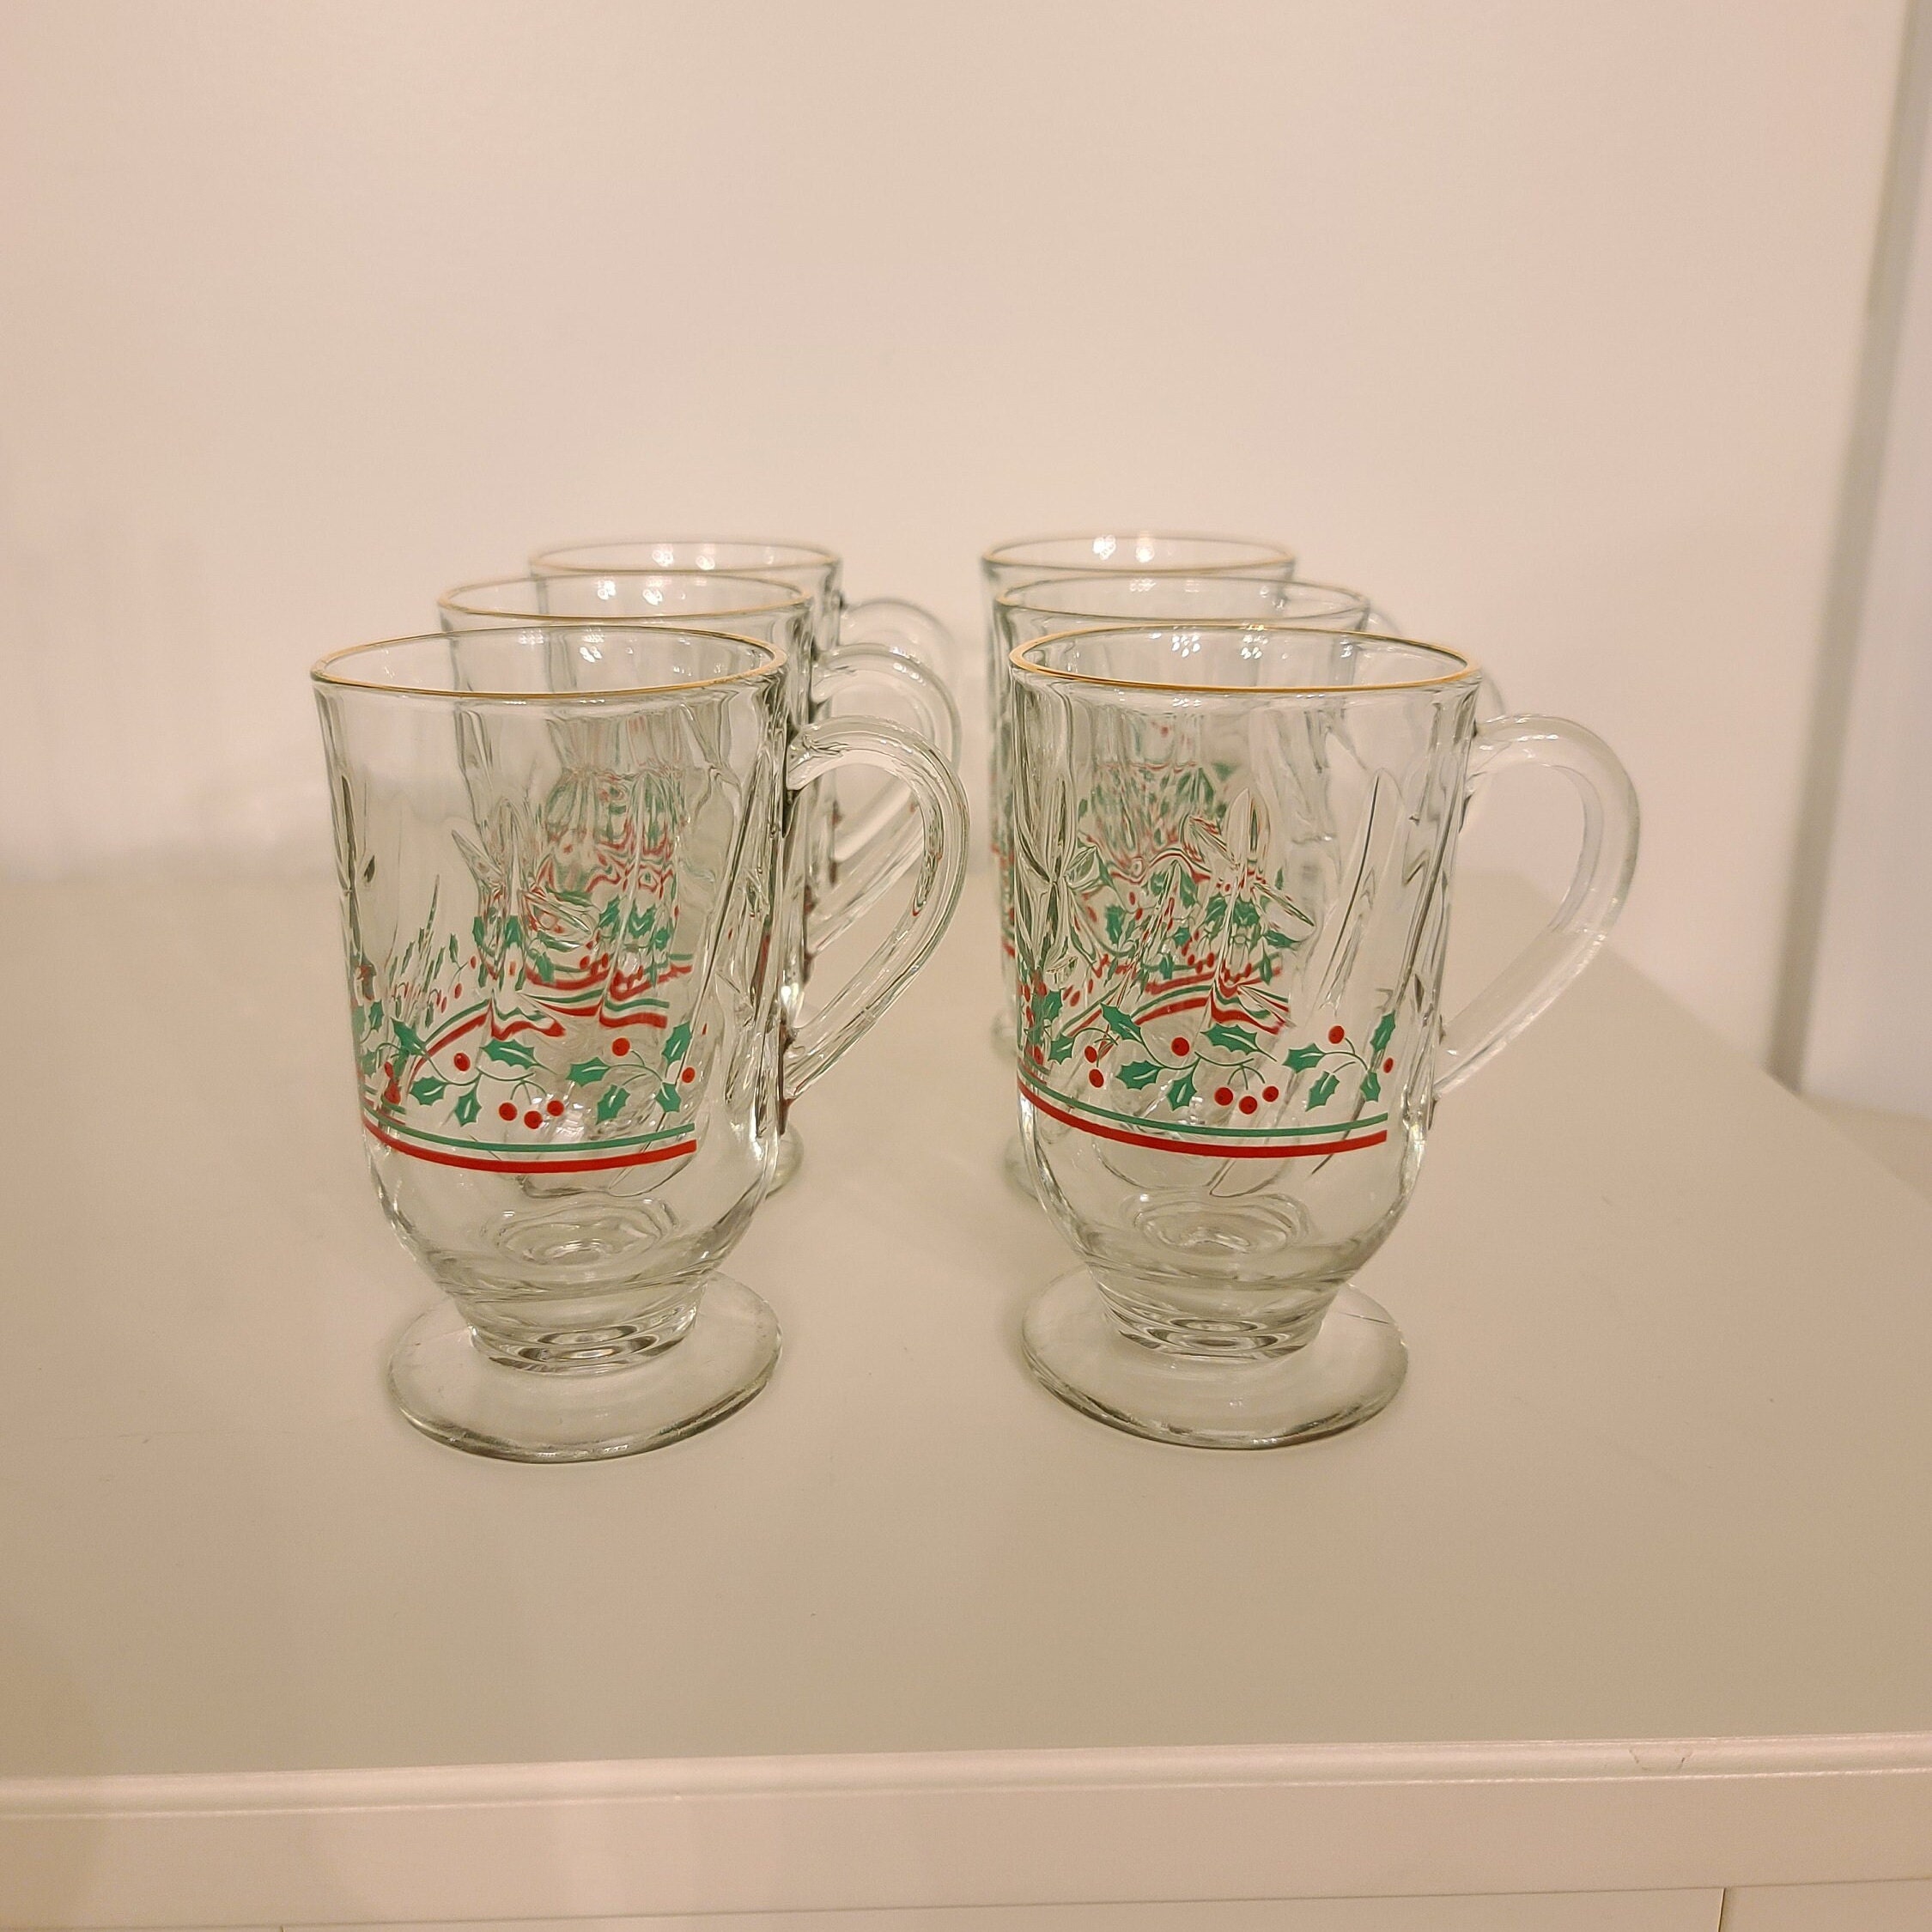 Clear Glass Holly Berry Mugs 12oz by Libbey, Christmas Coffee Mugs